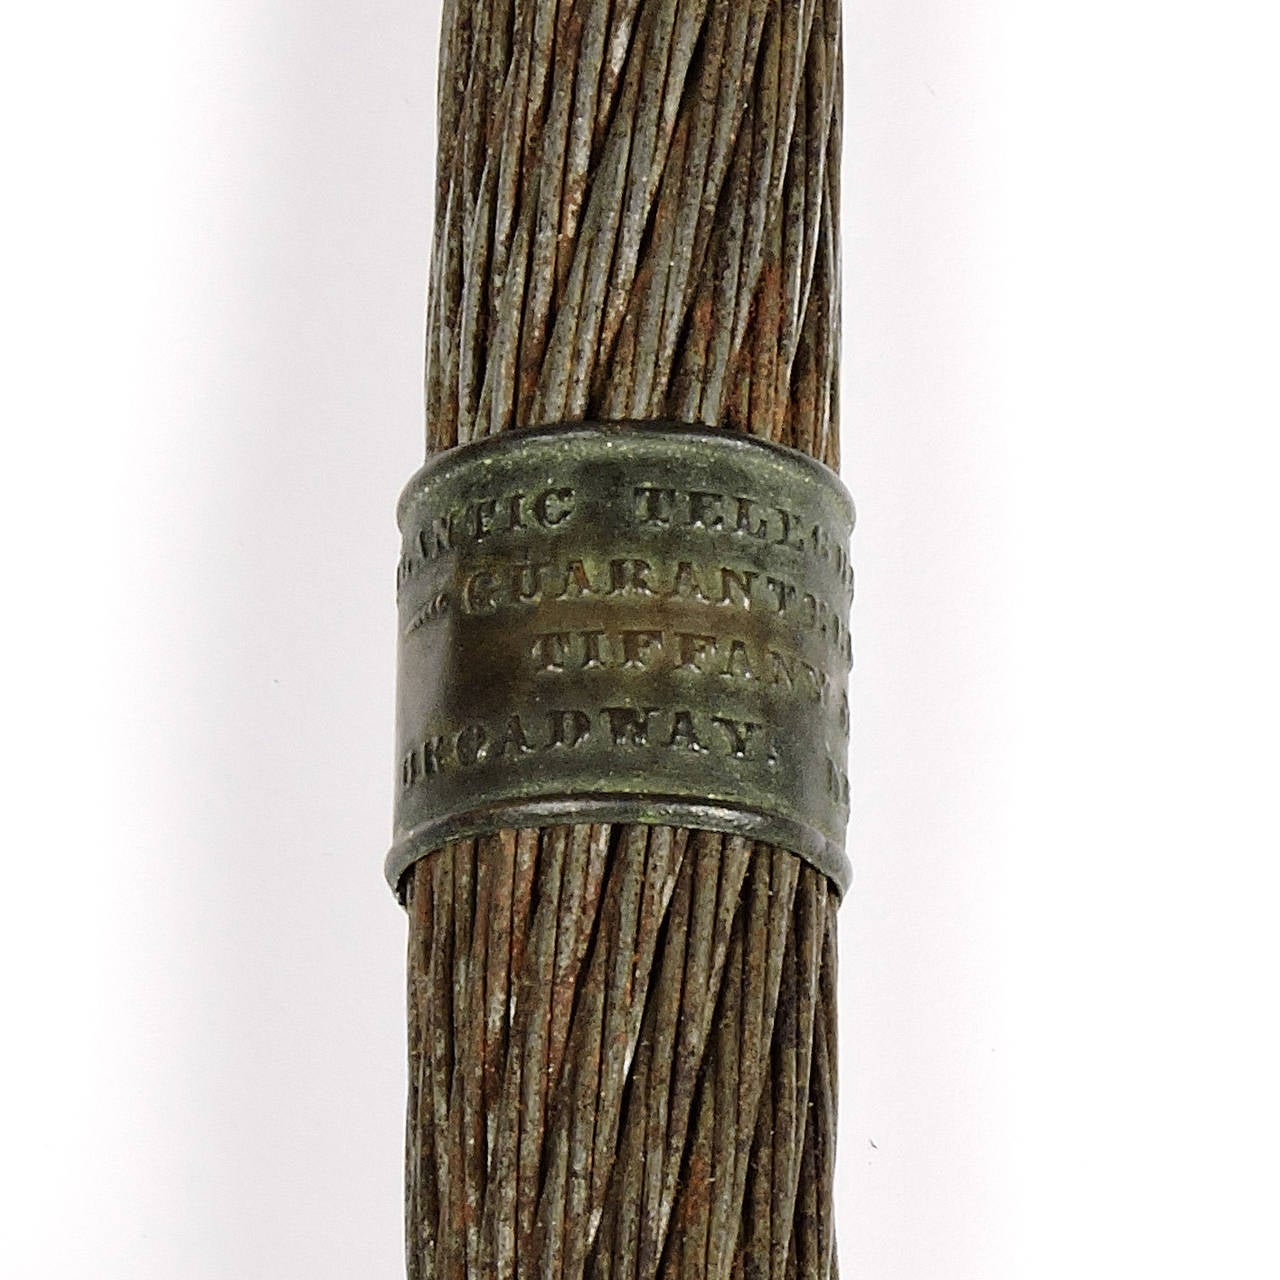 An original section of the first transatlantic cable laid by Cyrus W. Field. Brass caps at both ends with a center band that reads 